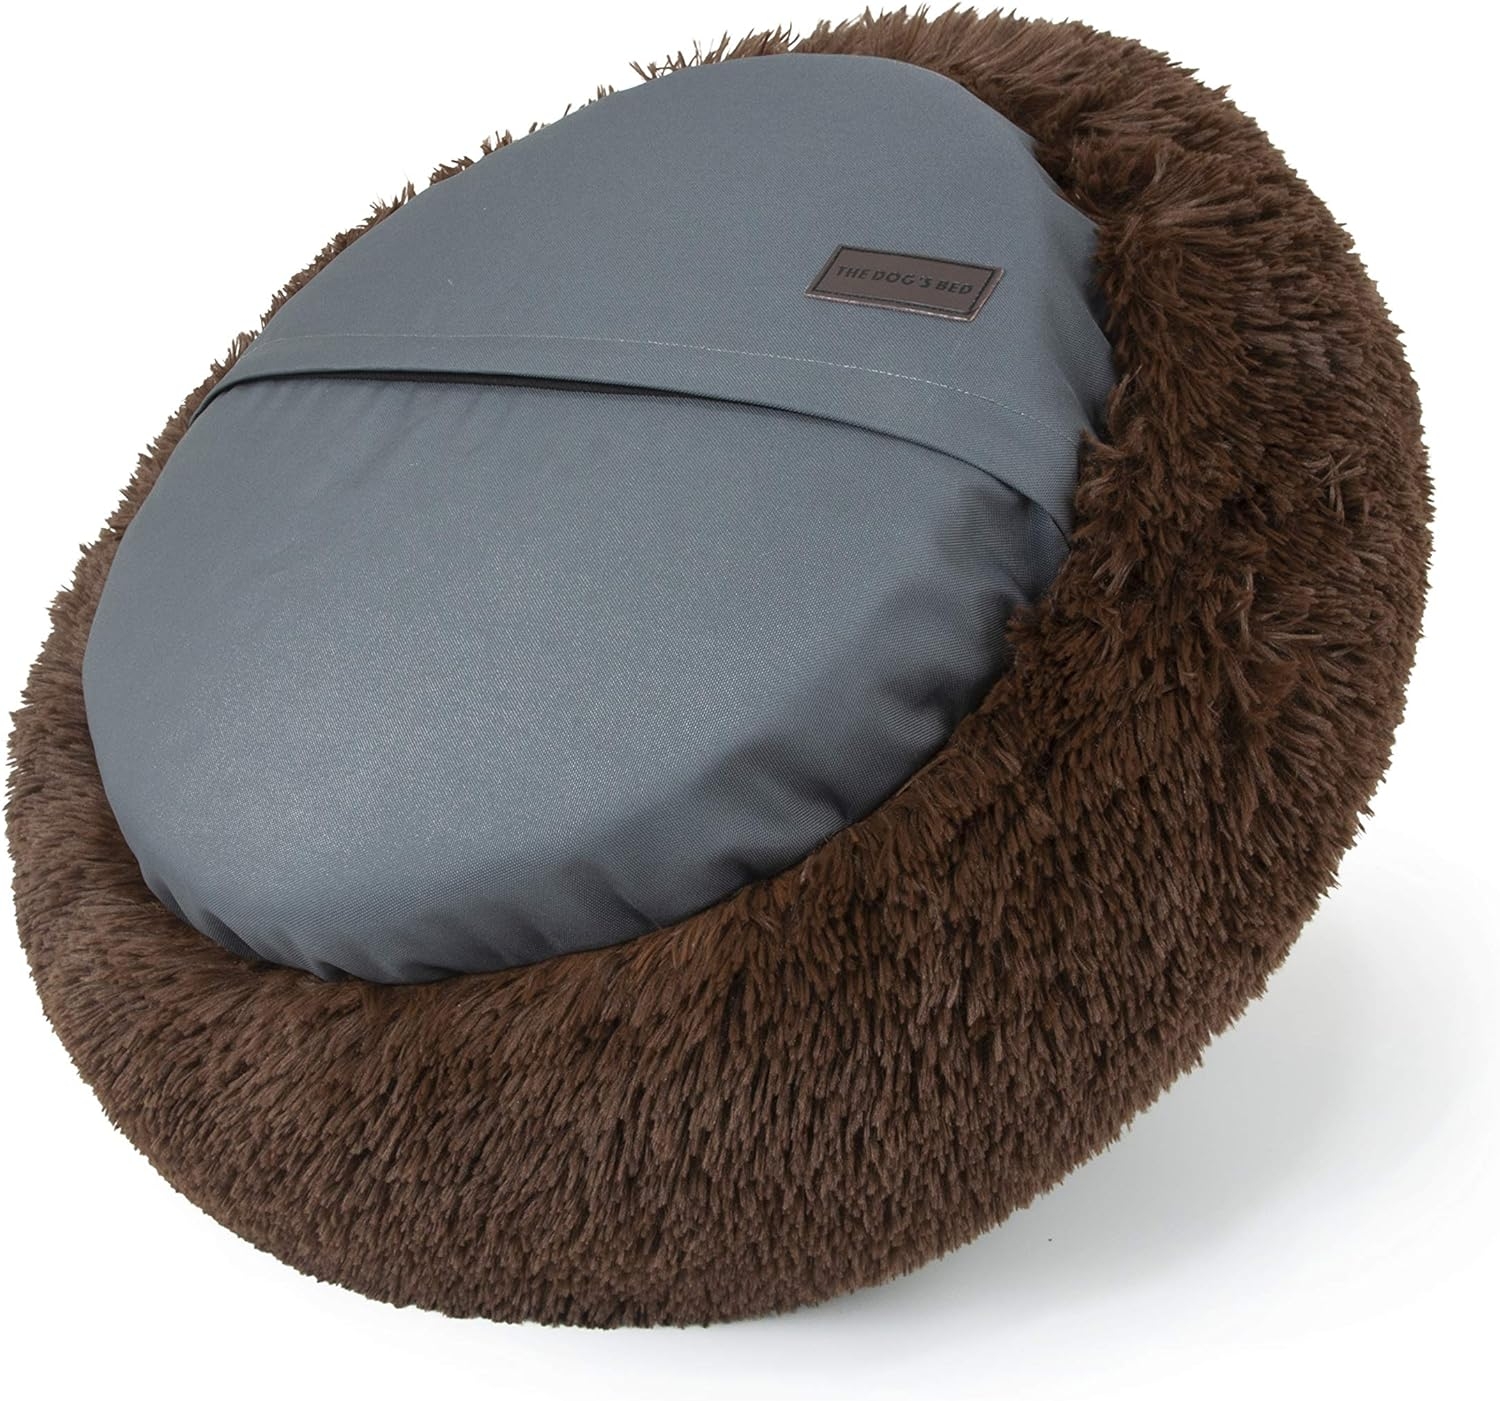 The Dog’s Bed Sound Sleep Donut Dog Bed, Small Chocolate Brown Plush Removable Cover Premium Calming Nest Bed